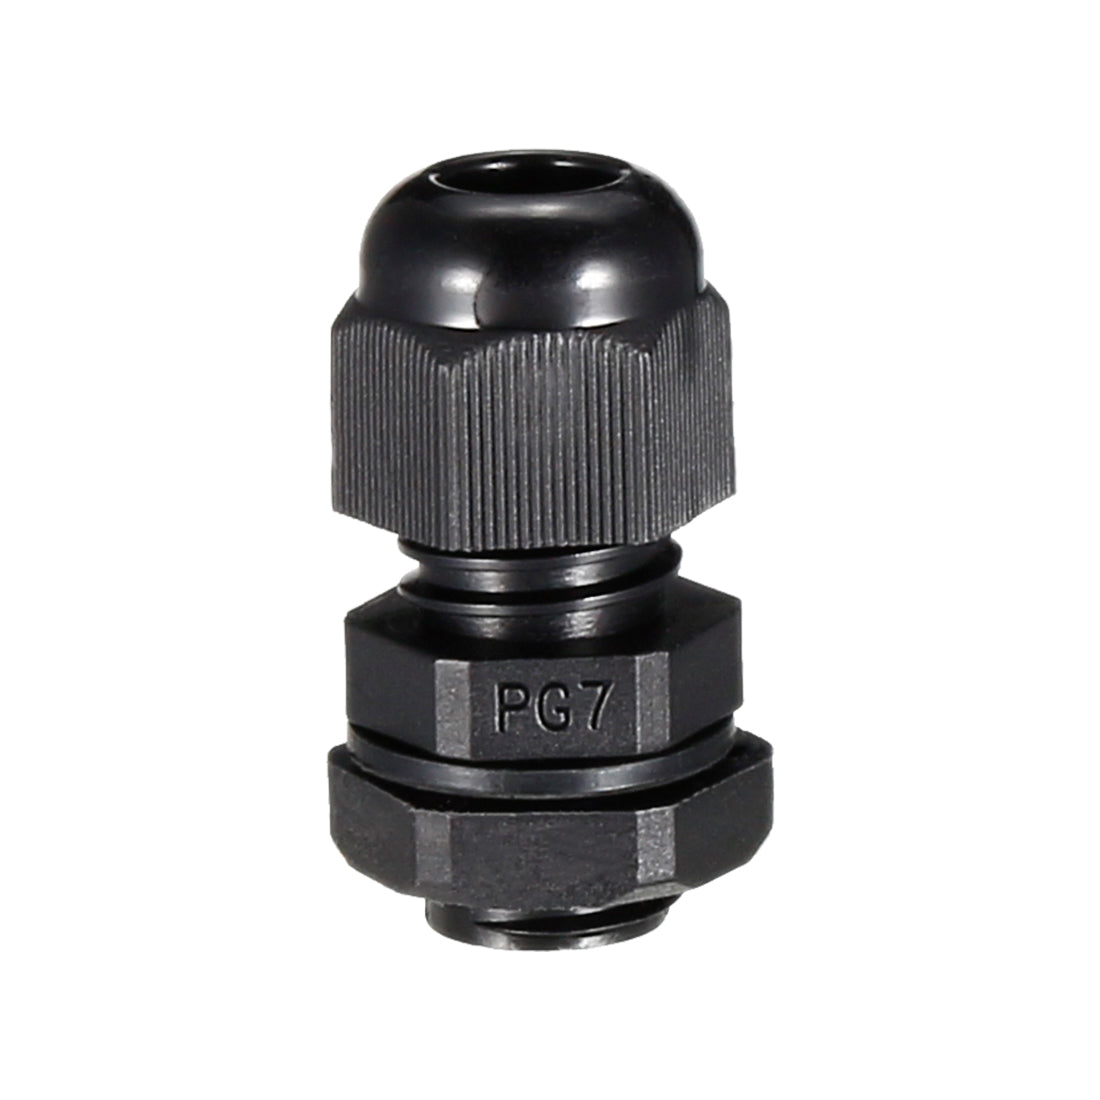 uxcell Uxcell PG7 Cable Gland Waterproof Plastic Joint Adjustable Locknut Black for 3mm-6.5mm Dia Cable Wire